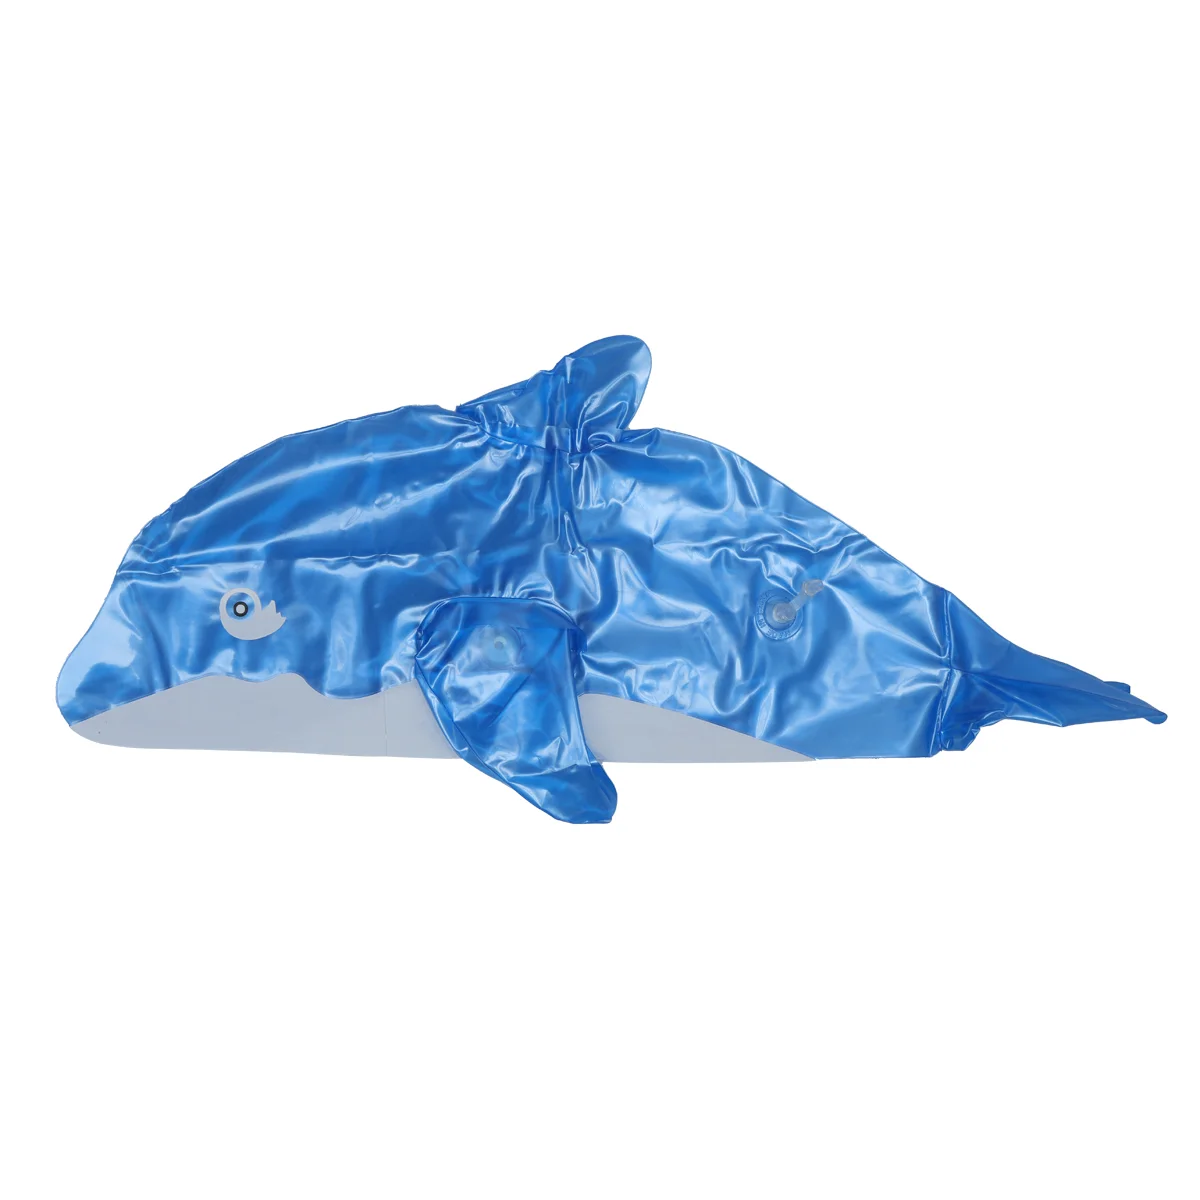 

Inflatable Dolphin Blow Up Bath Time Toy Swimming Pool Beach Toy Party Favor Gift(Blue)